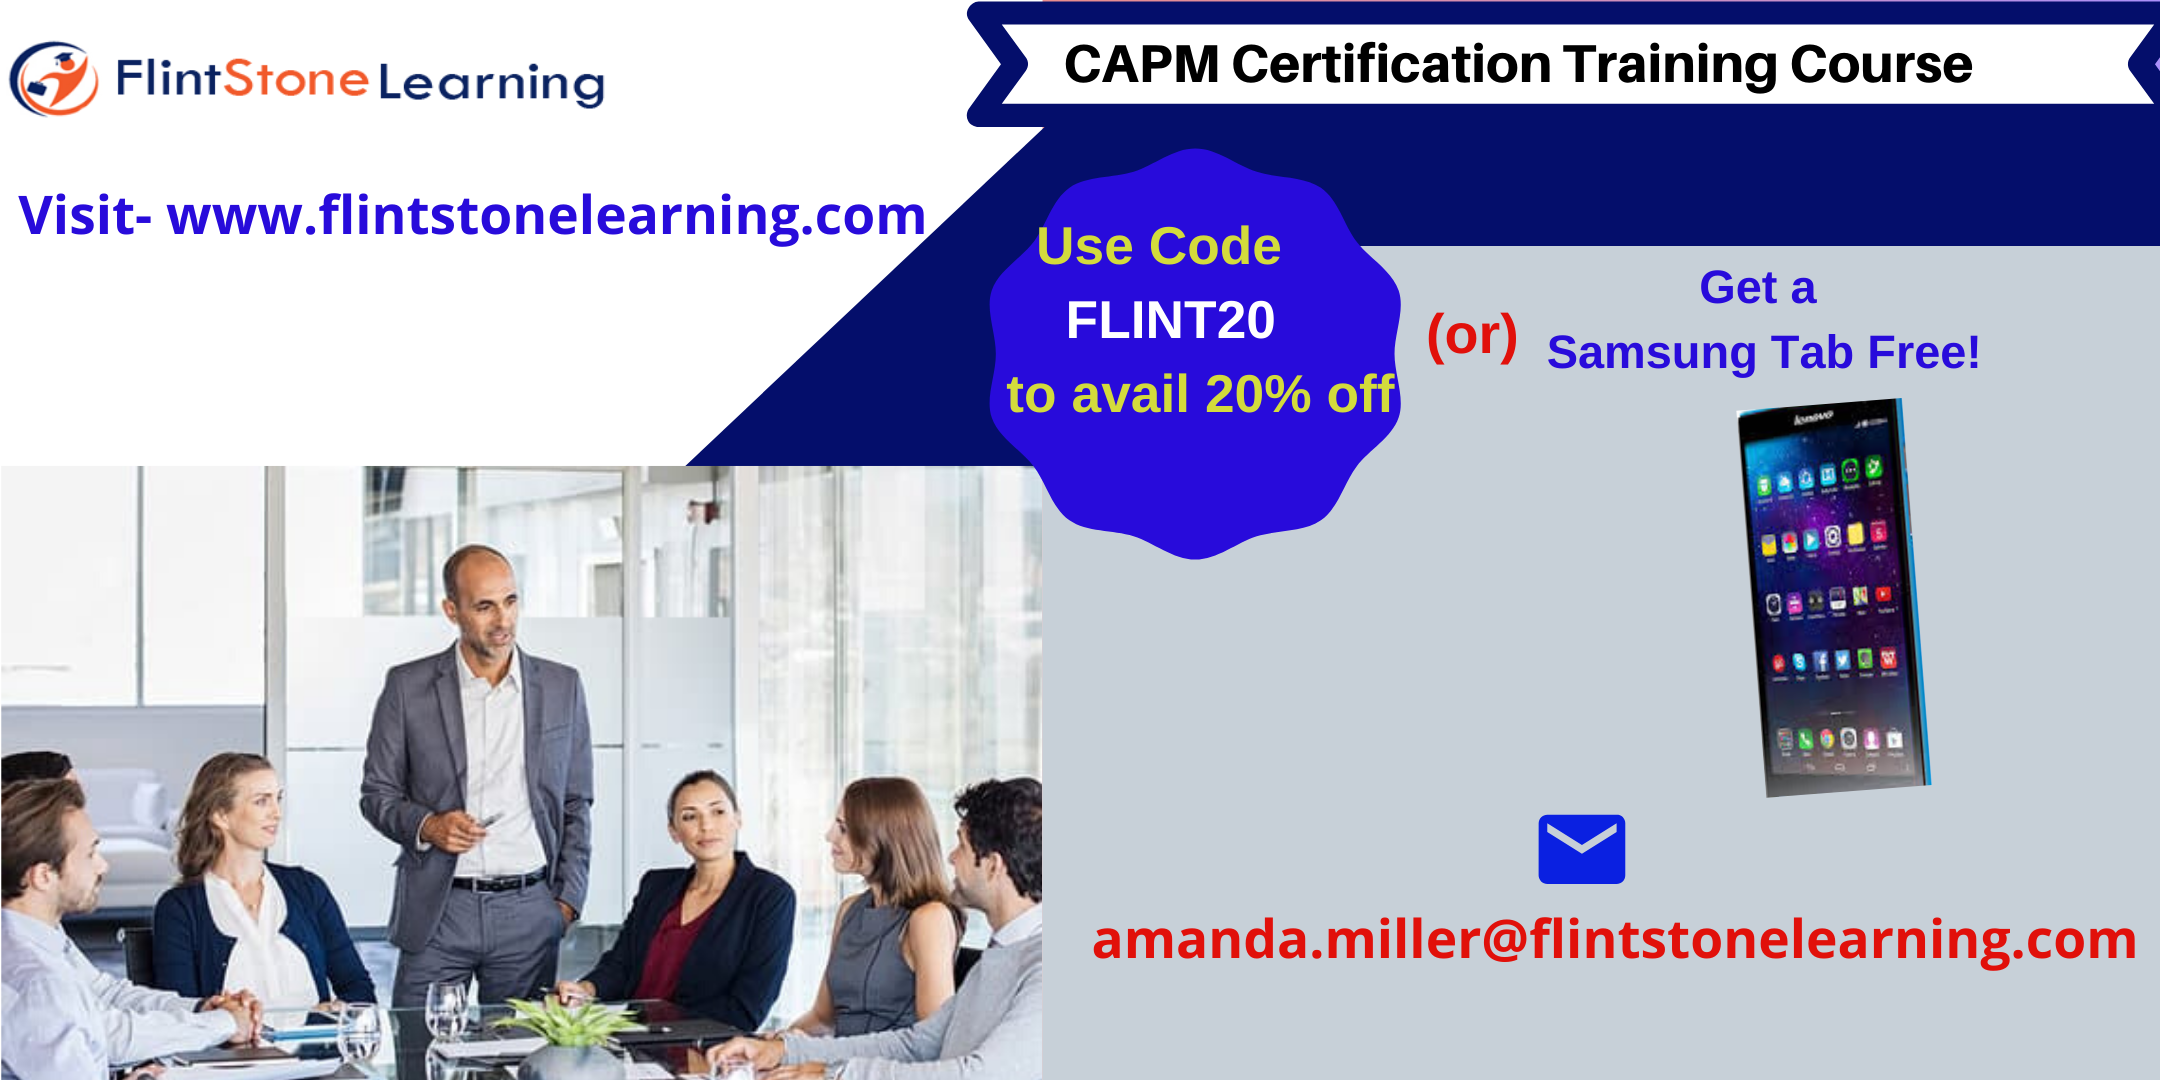 CAPM Certification Training Course in DeSoto, TX